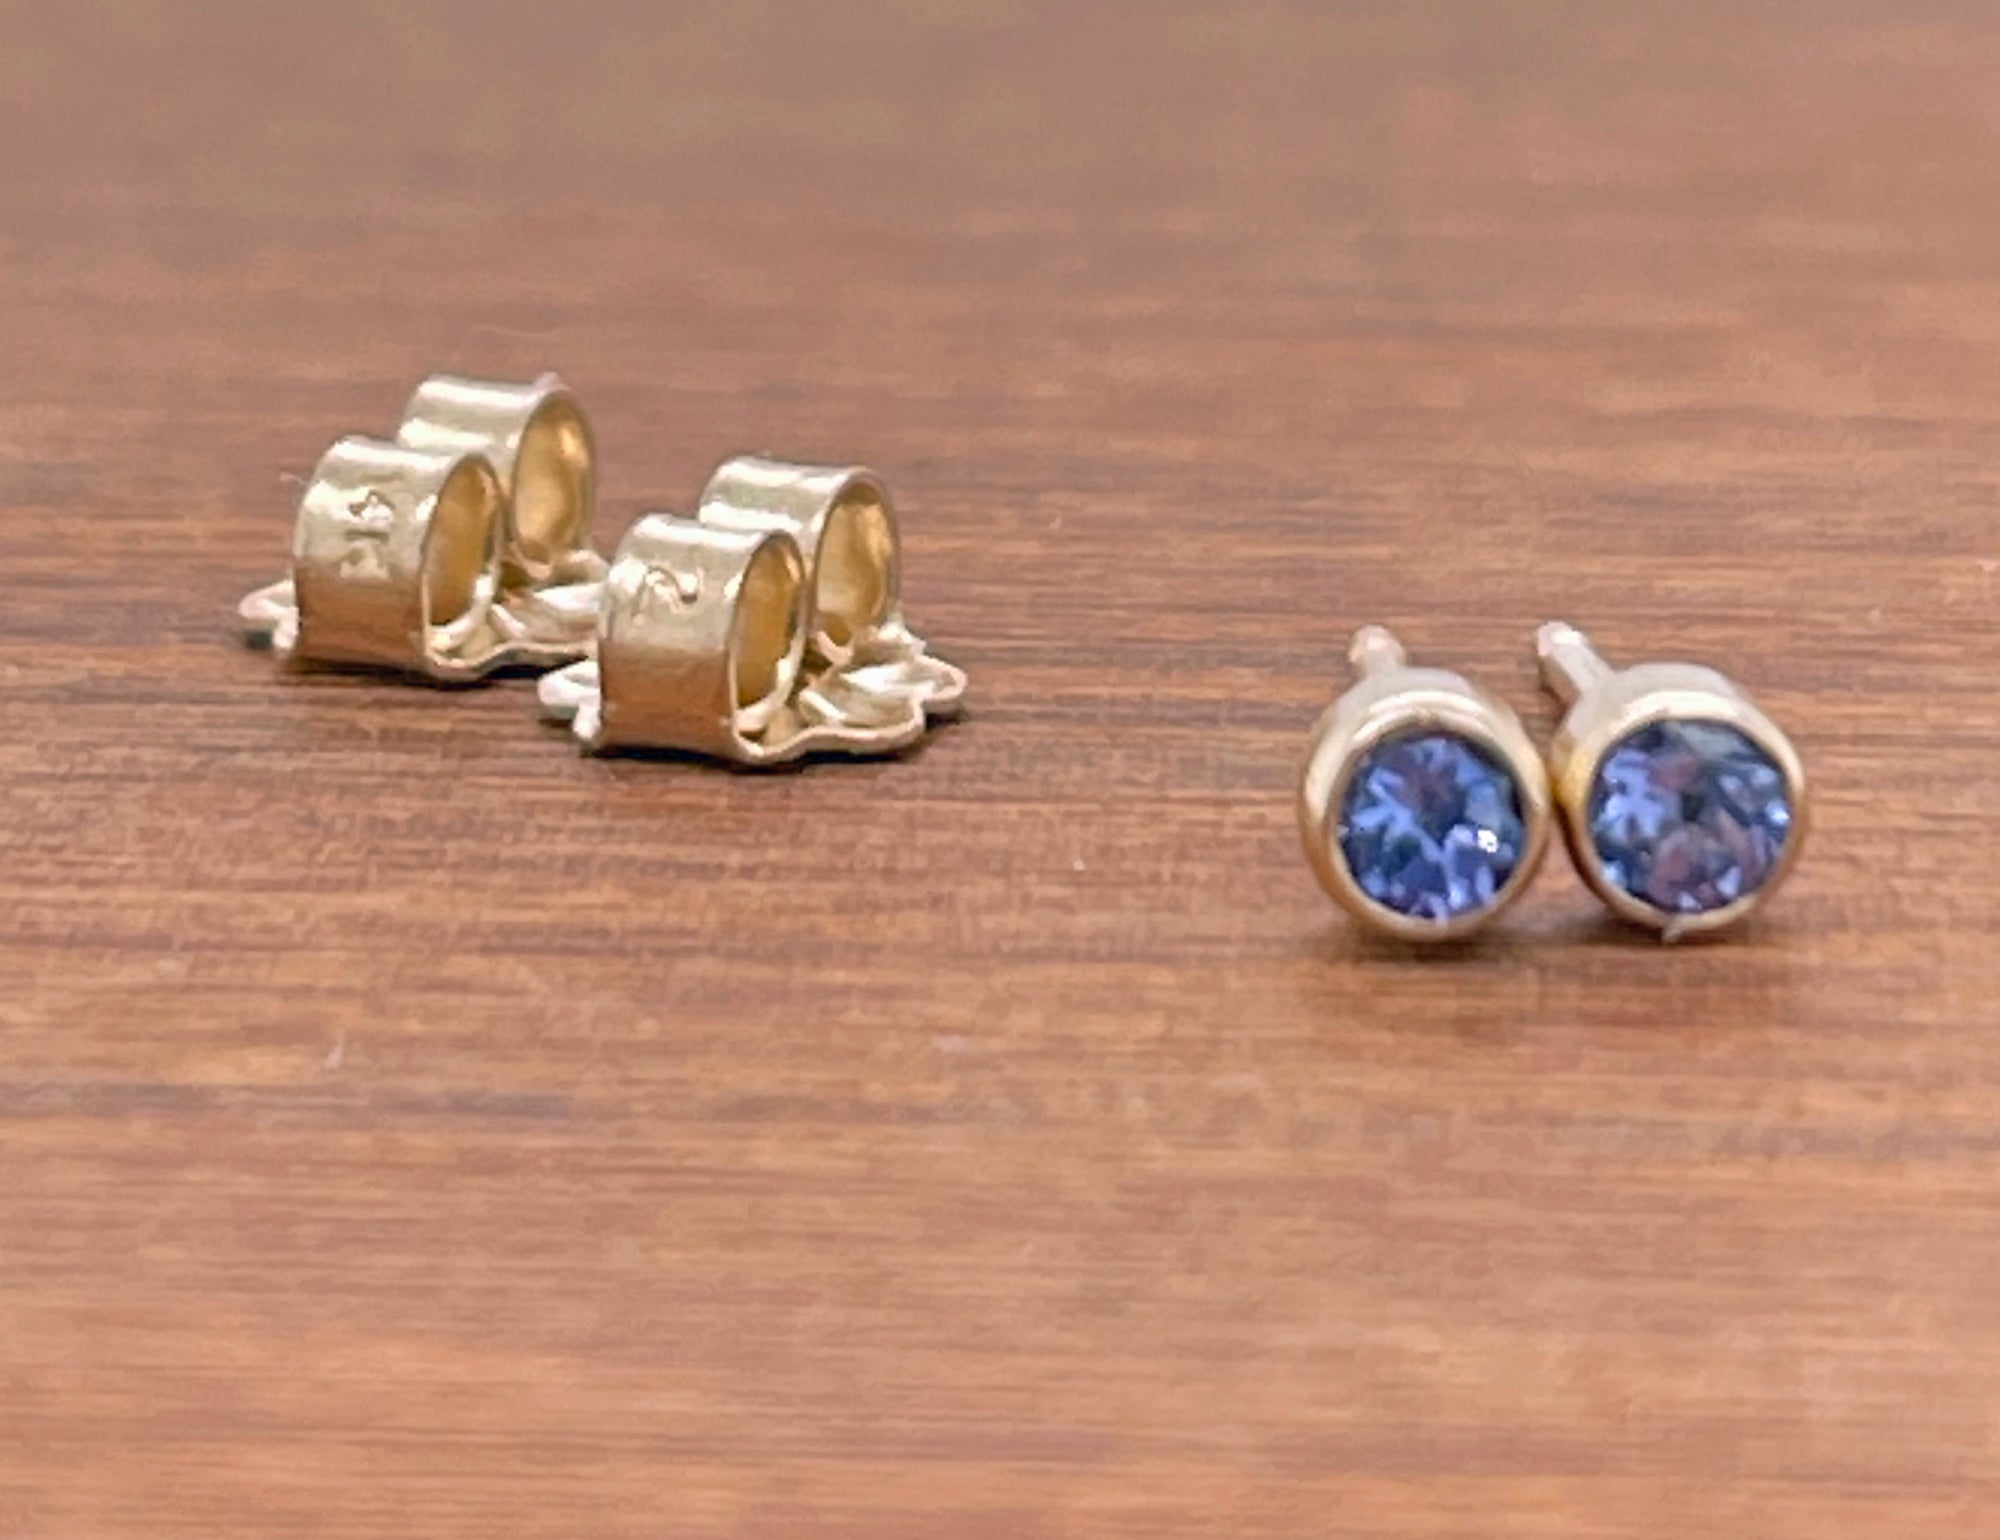 Tanzanite Earrings, Solid 14k Gold Tanzanite Stud Earrings, Small Natural Tanzanite Bezel Studs, Valentines Gift for Her